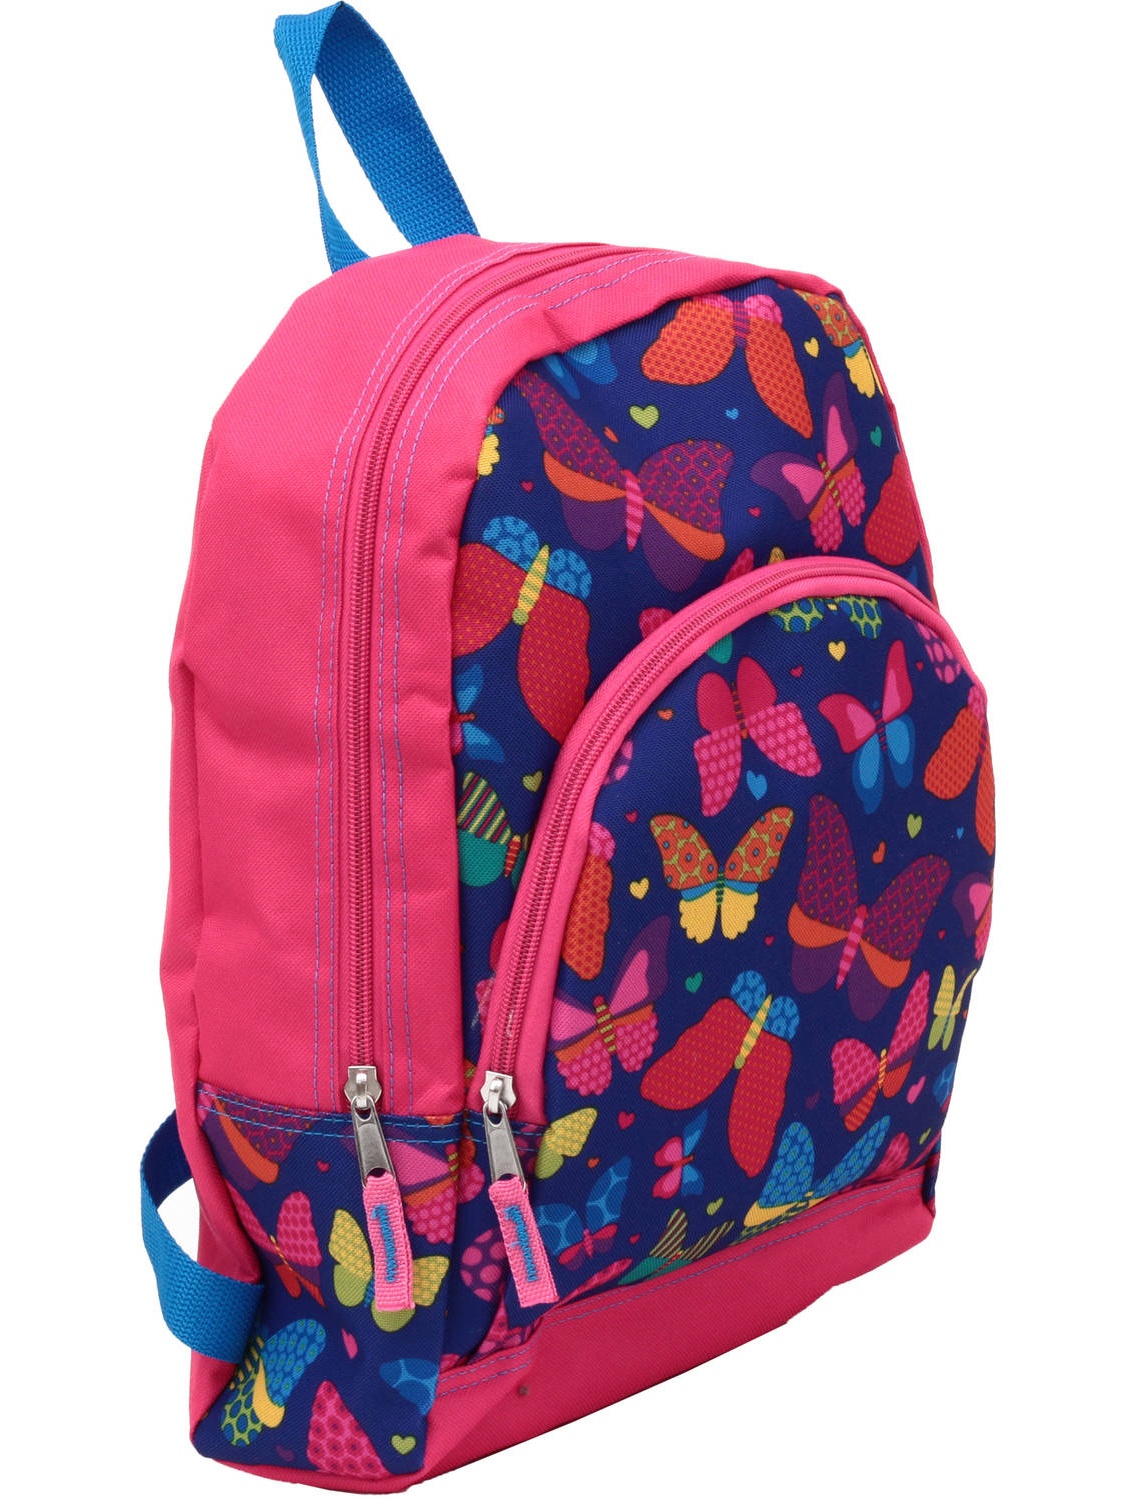 $3.97 Backpack Butterfly In Pink - image 1 of 2